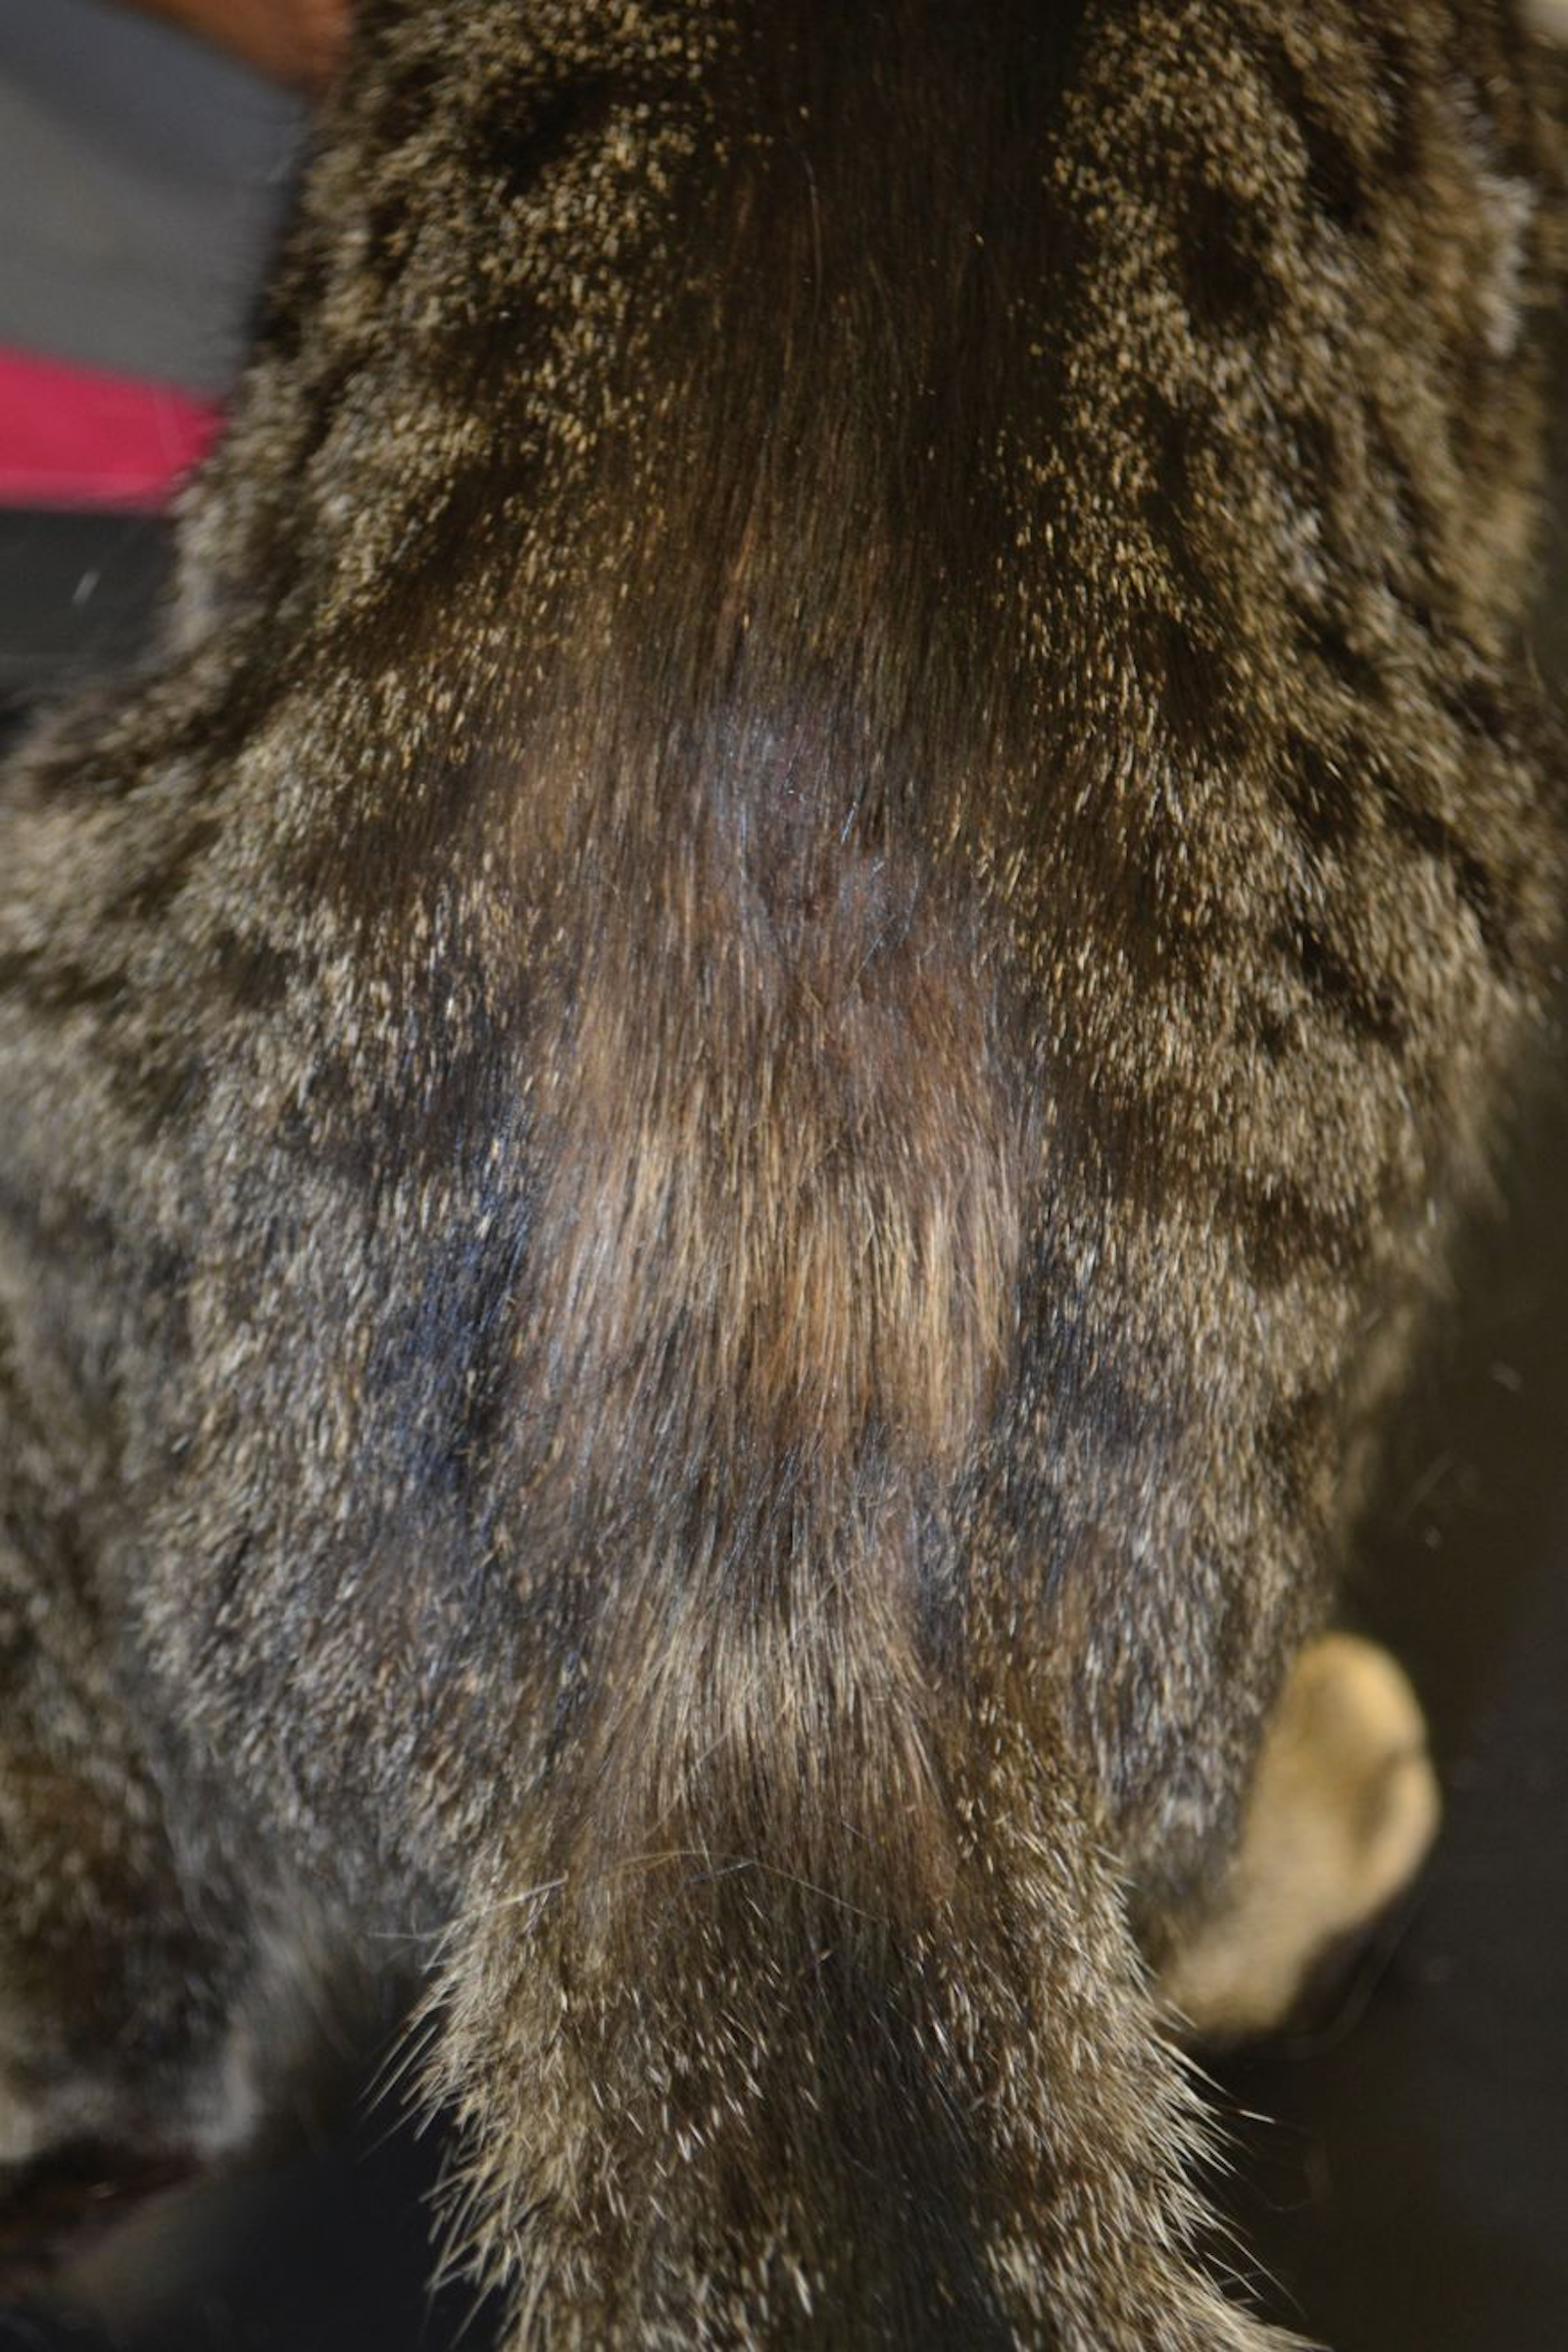 Overgrooming affecting the sacral region